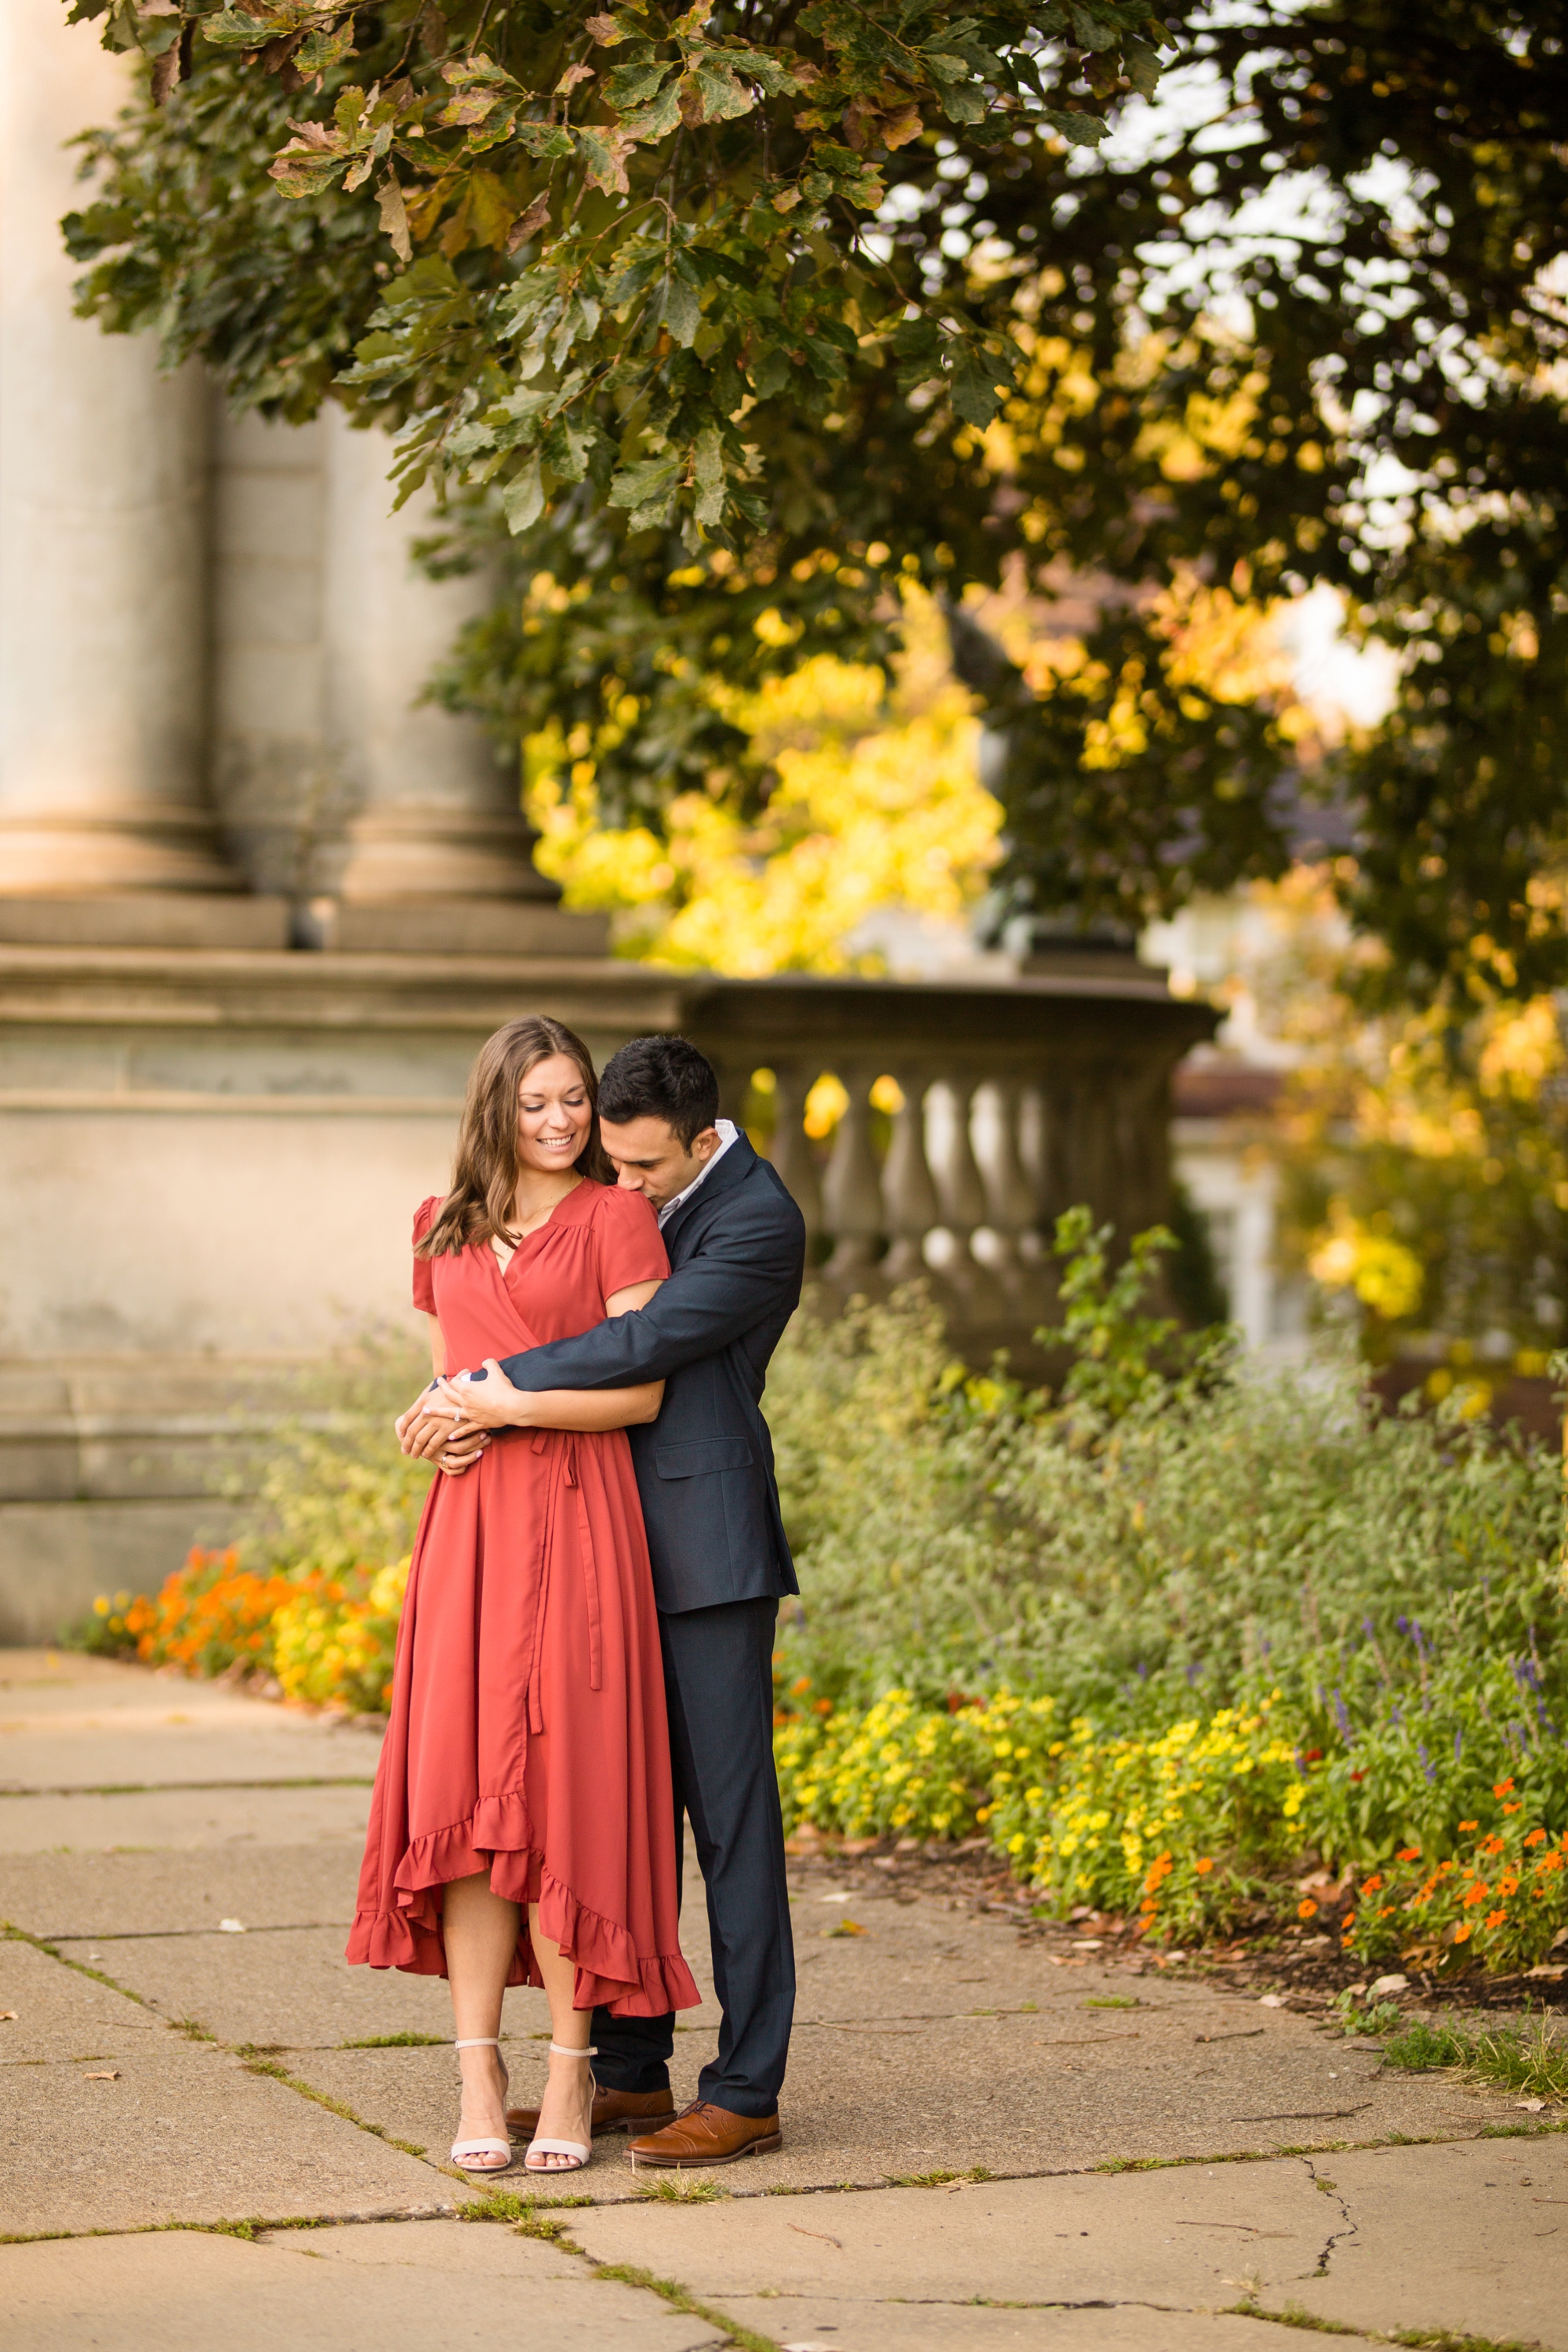 pittsburgh wedding photographer, pittsburgh engagement photos, best spot in pittsburgh for photo shoot, highland park engagement pictures, downtown pittsburgh engagement photos